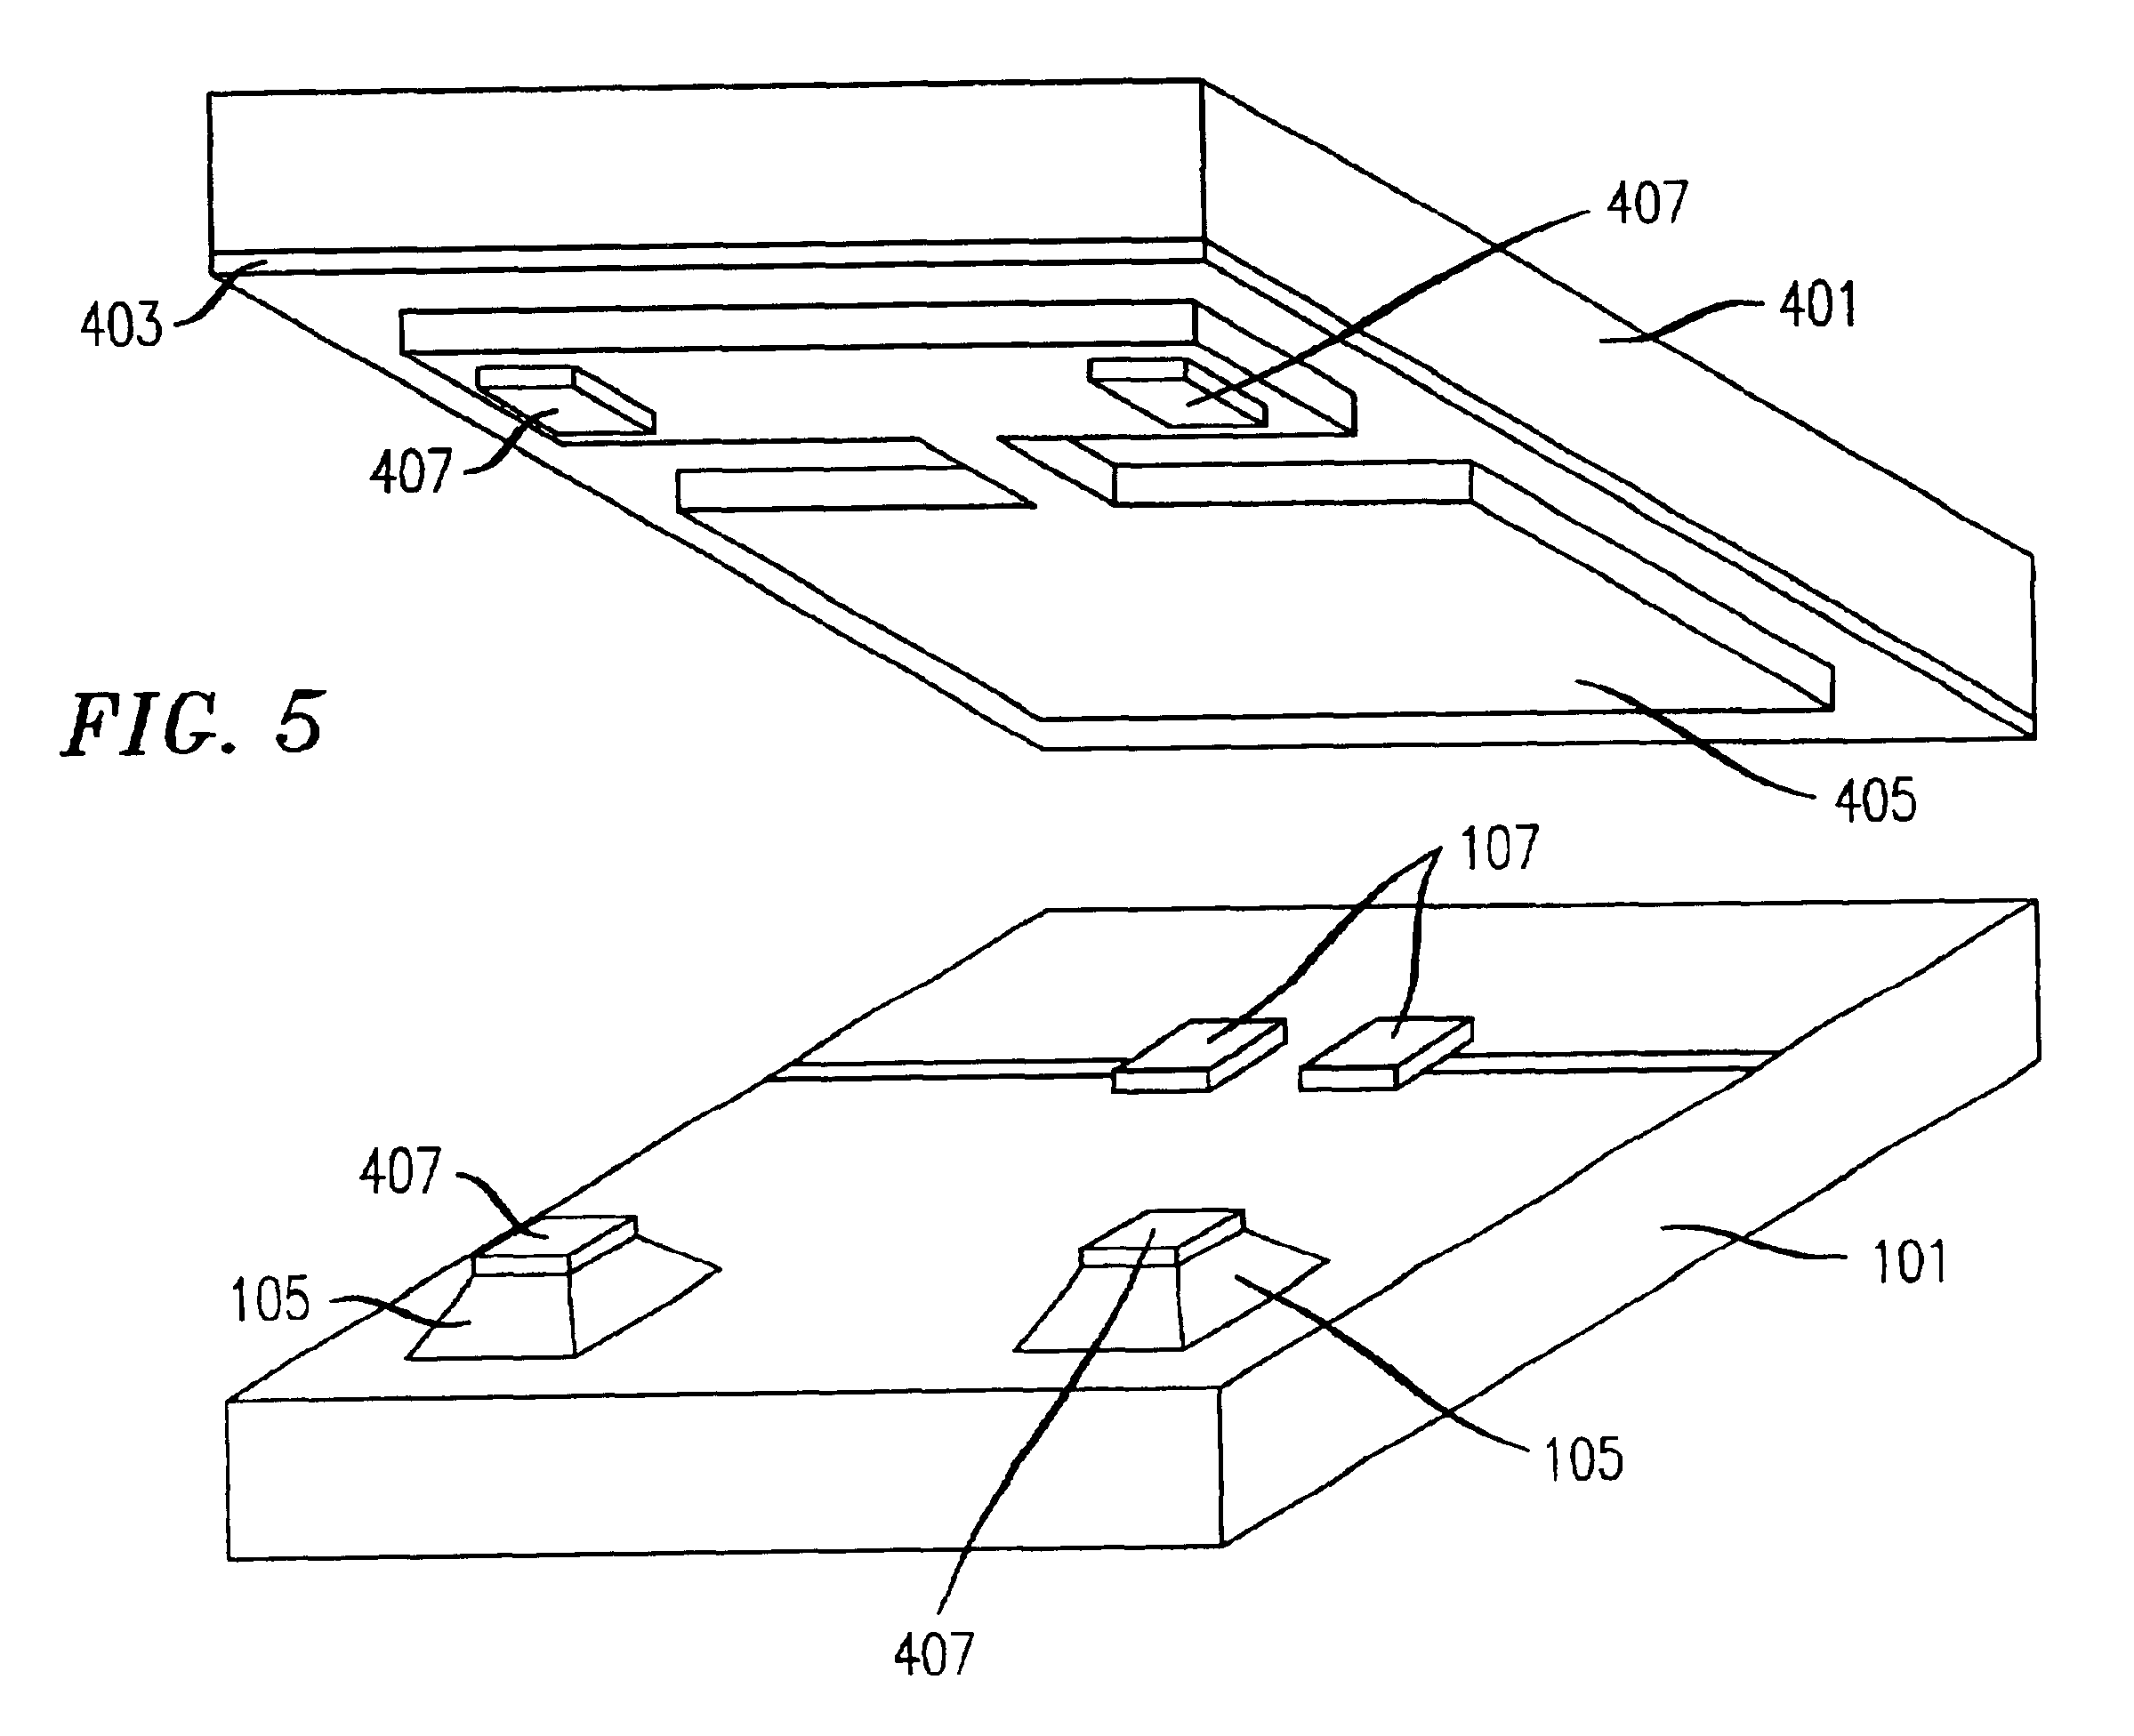 Optical micro-electromechanical systems (MEMS) devices and methods of making same